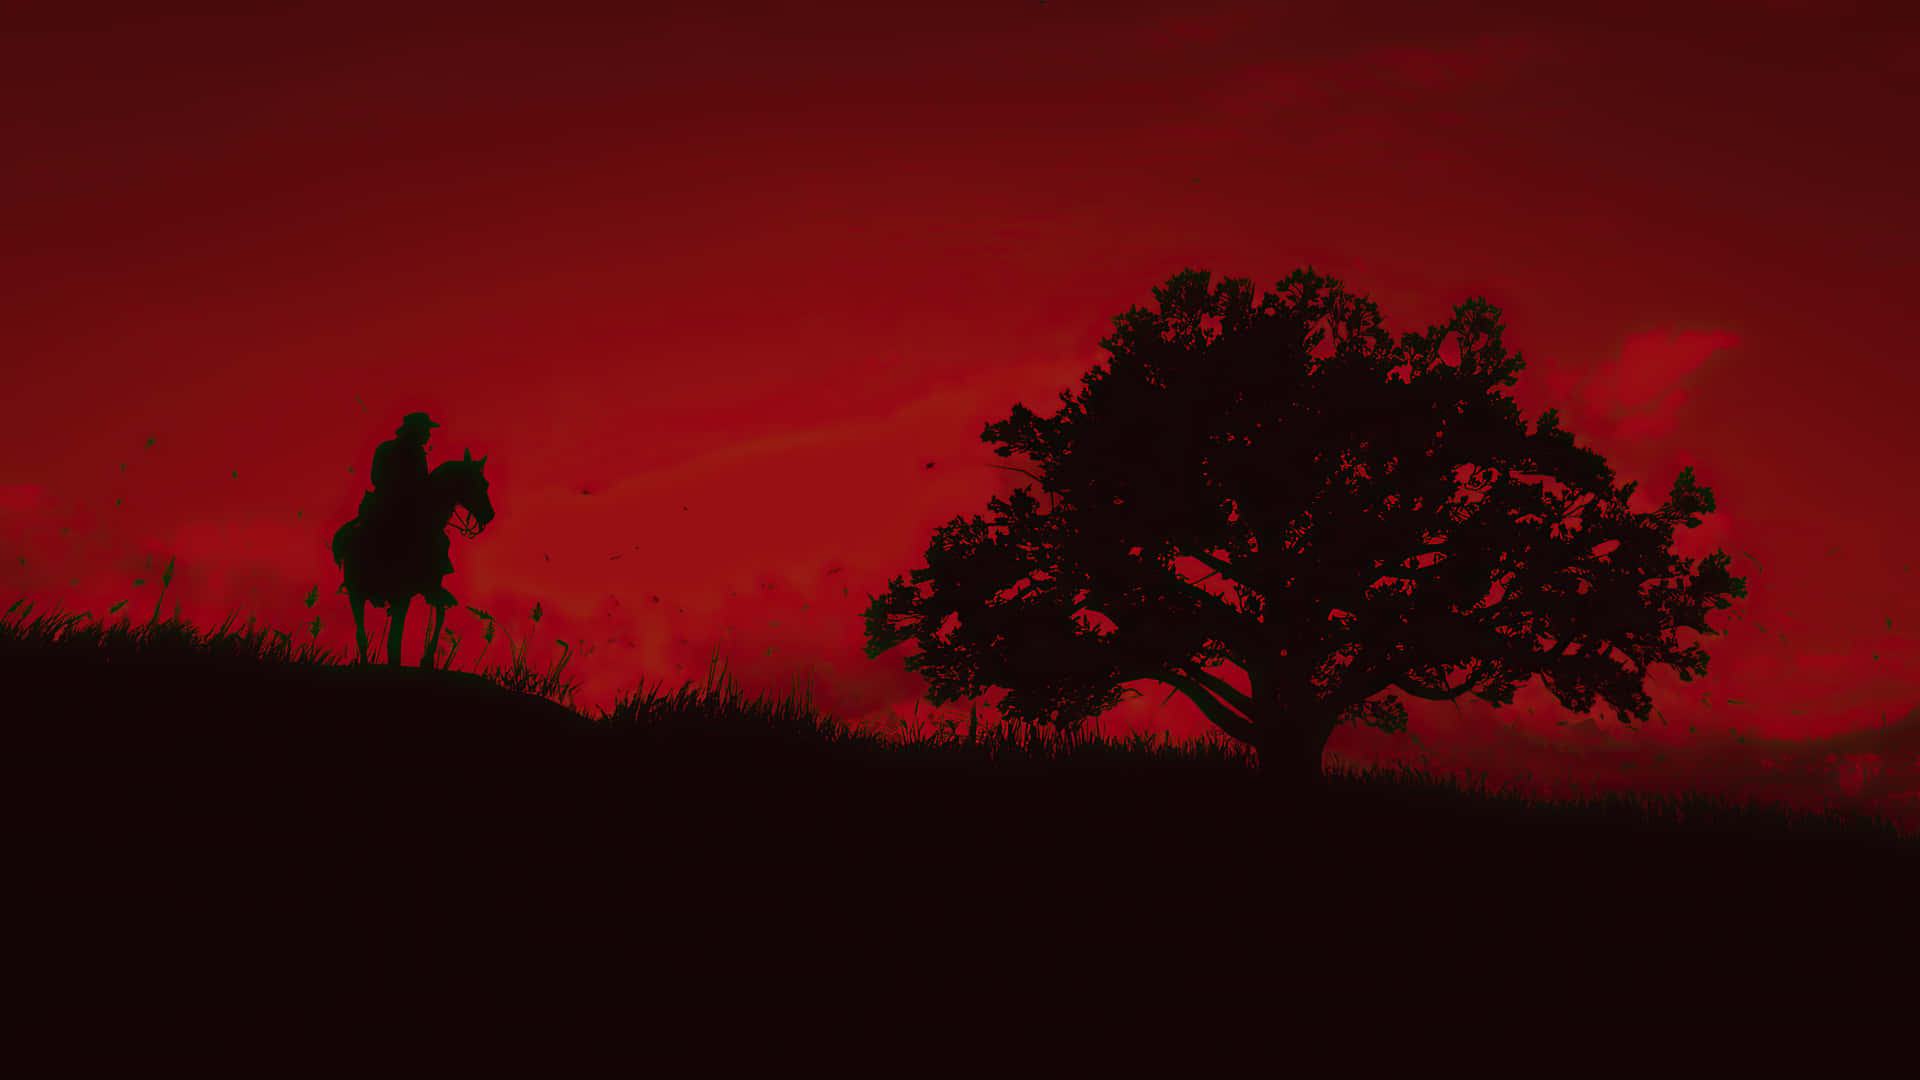 Rotegaming Red Dead Redemption Wallpaper